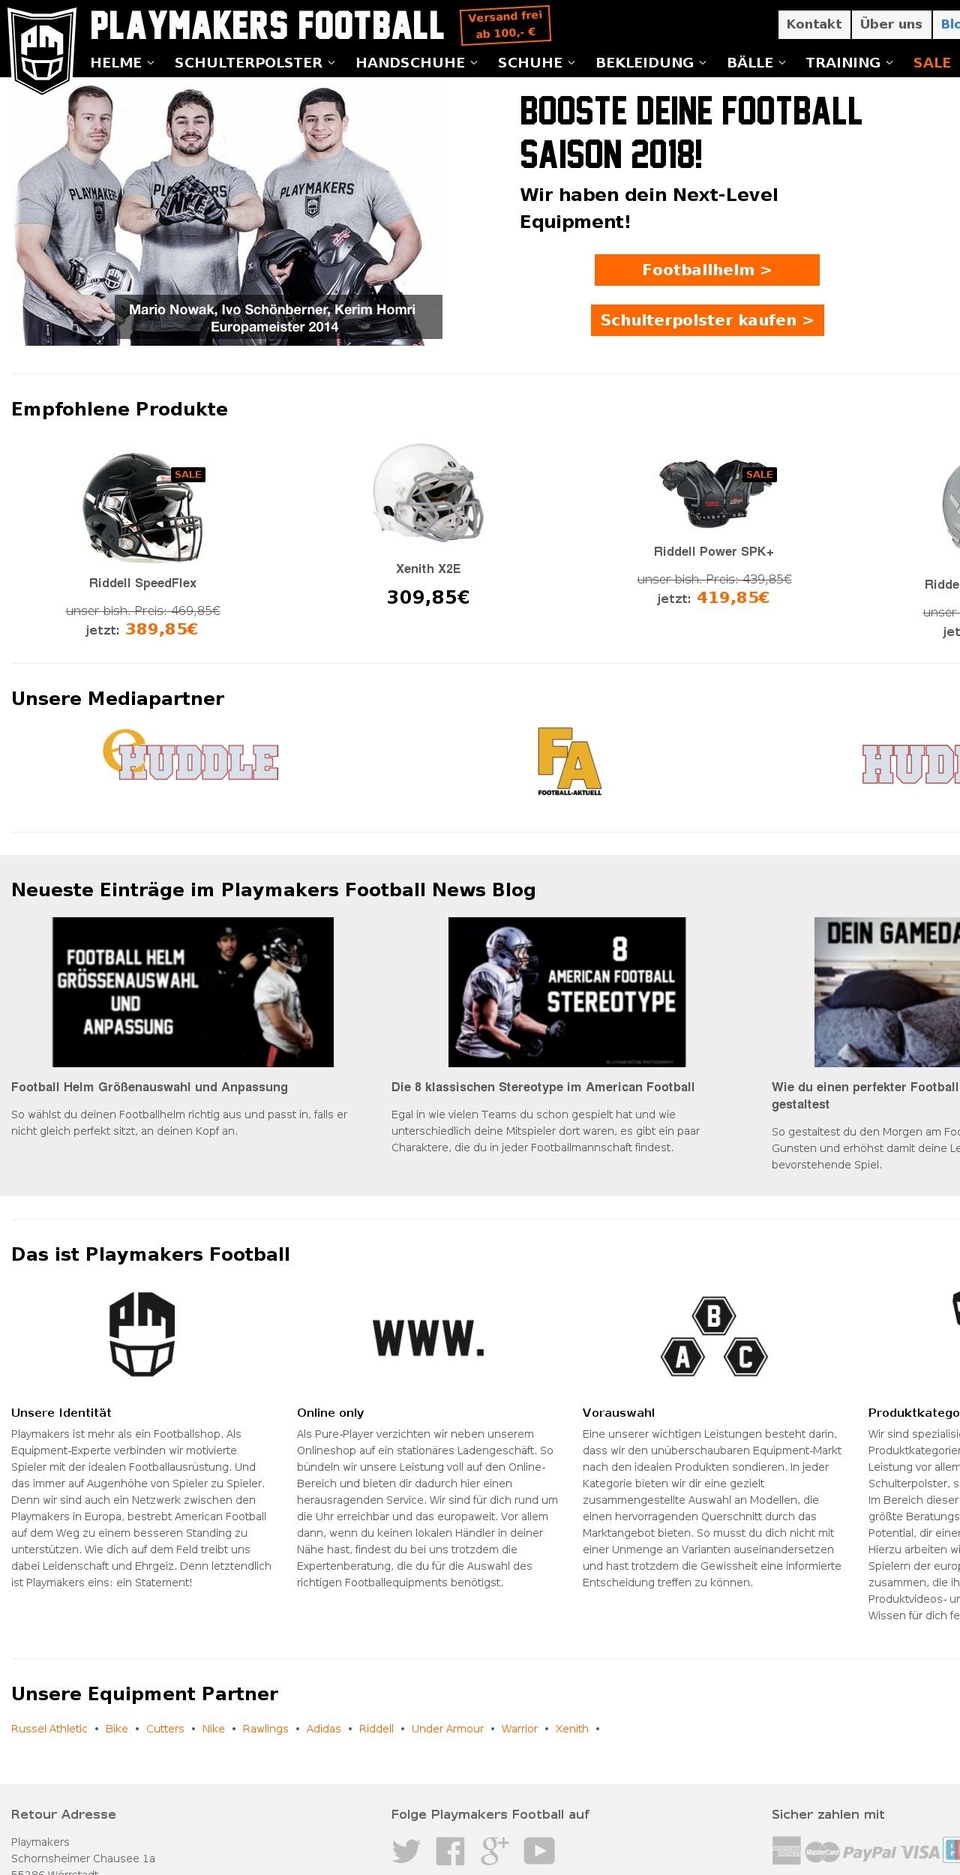 Playmakers Football v2 Shopify theme site example playmakers-football.com